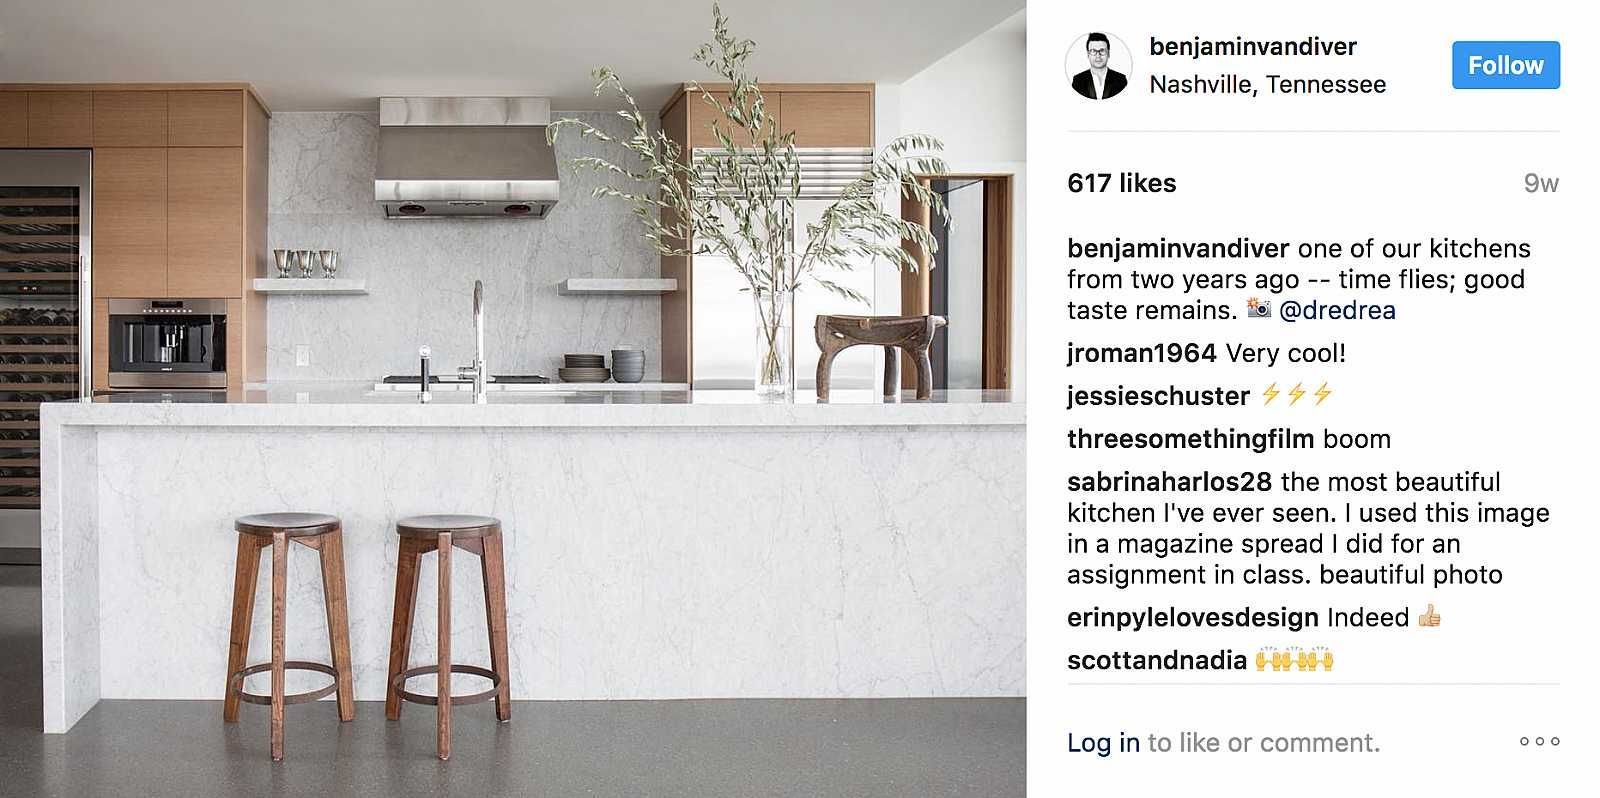 A picture of a kitchen with two stools next to it